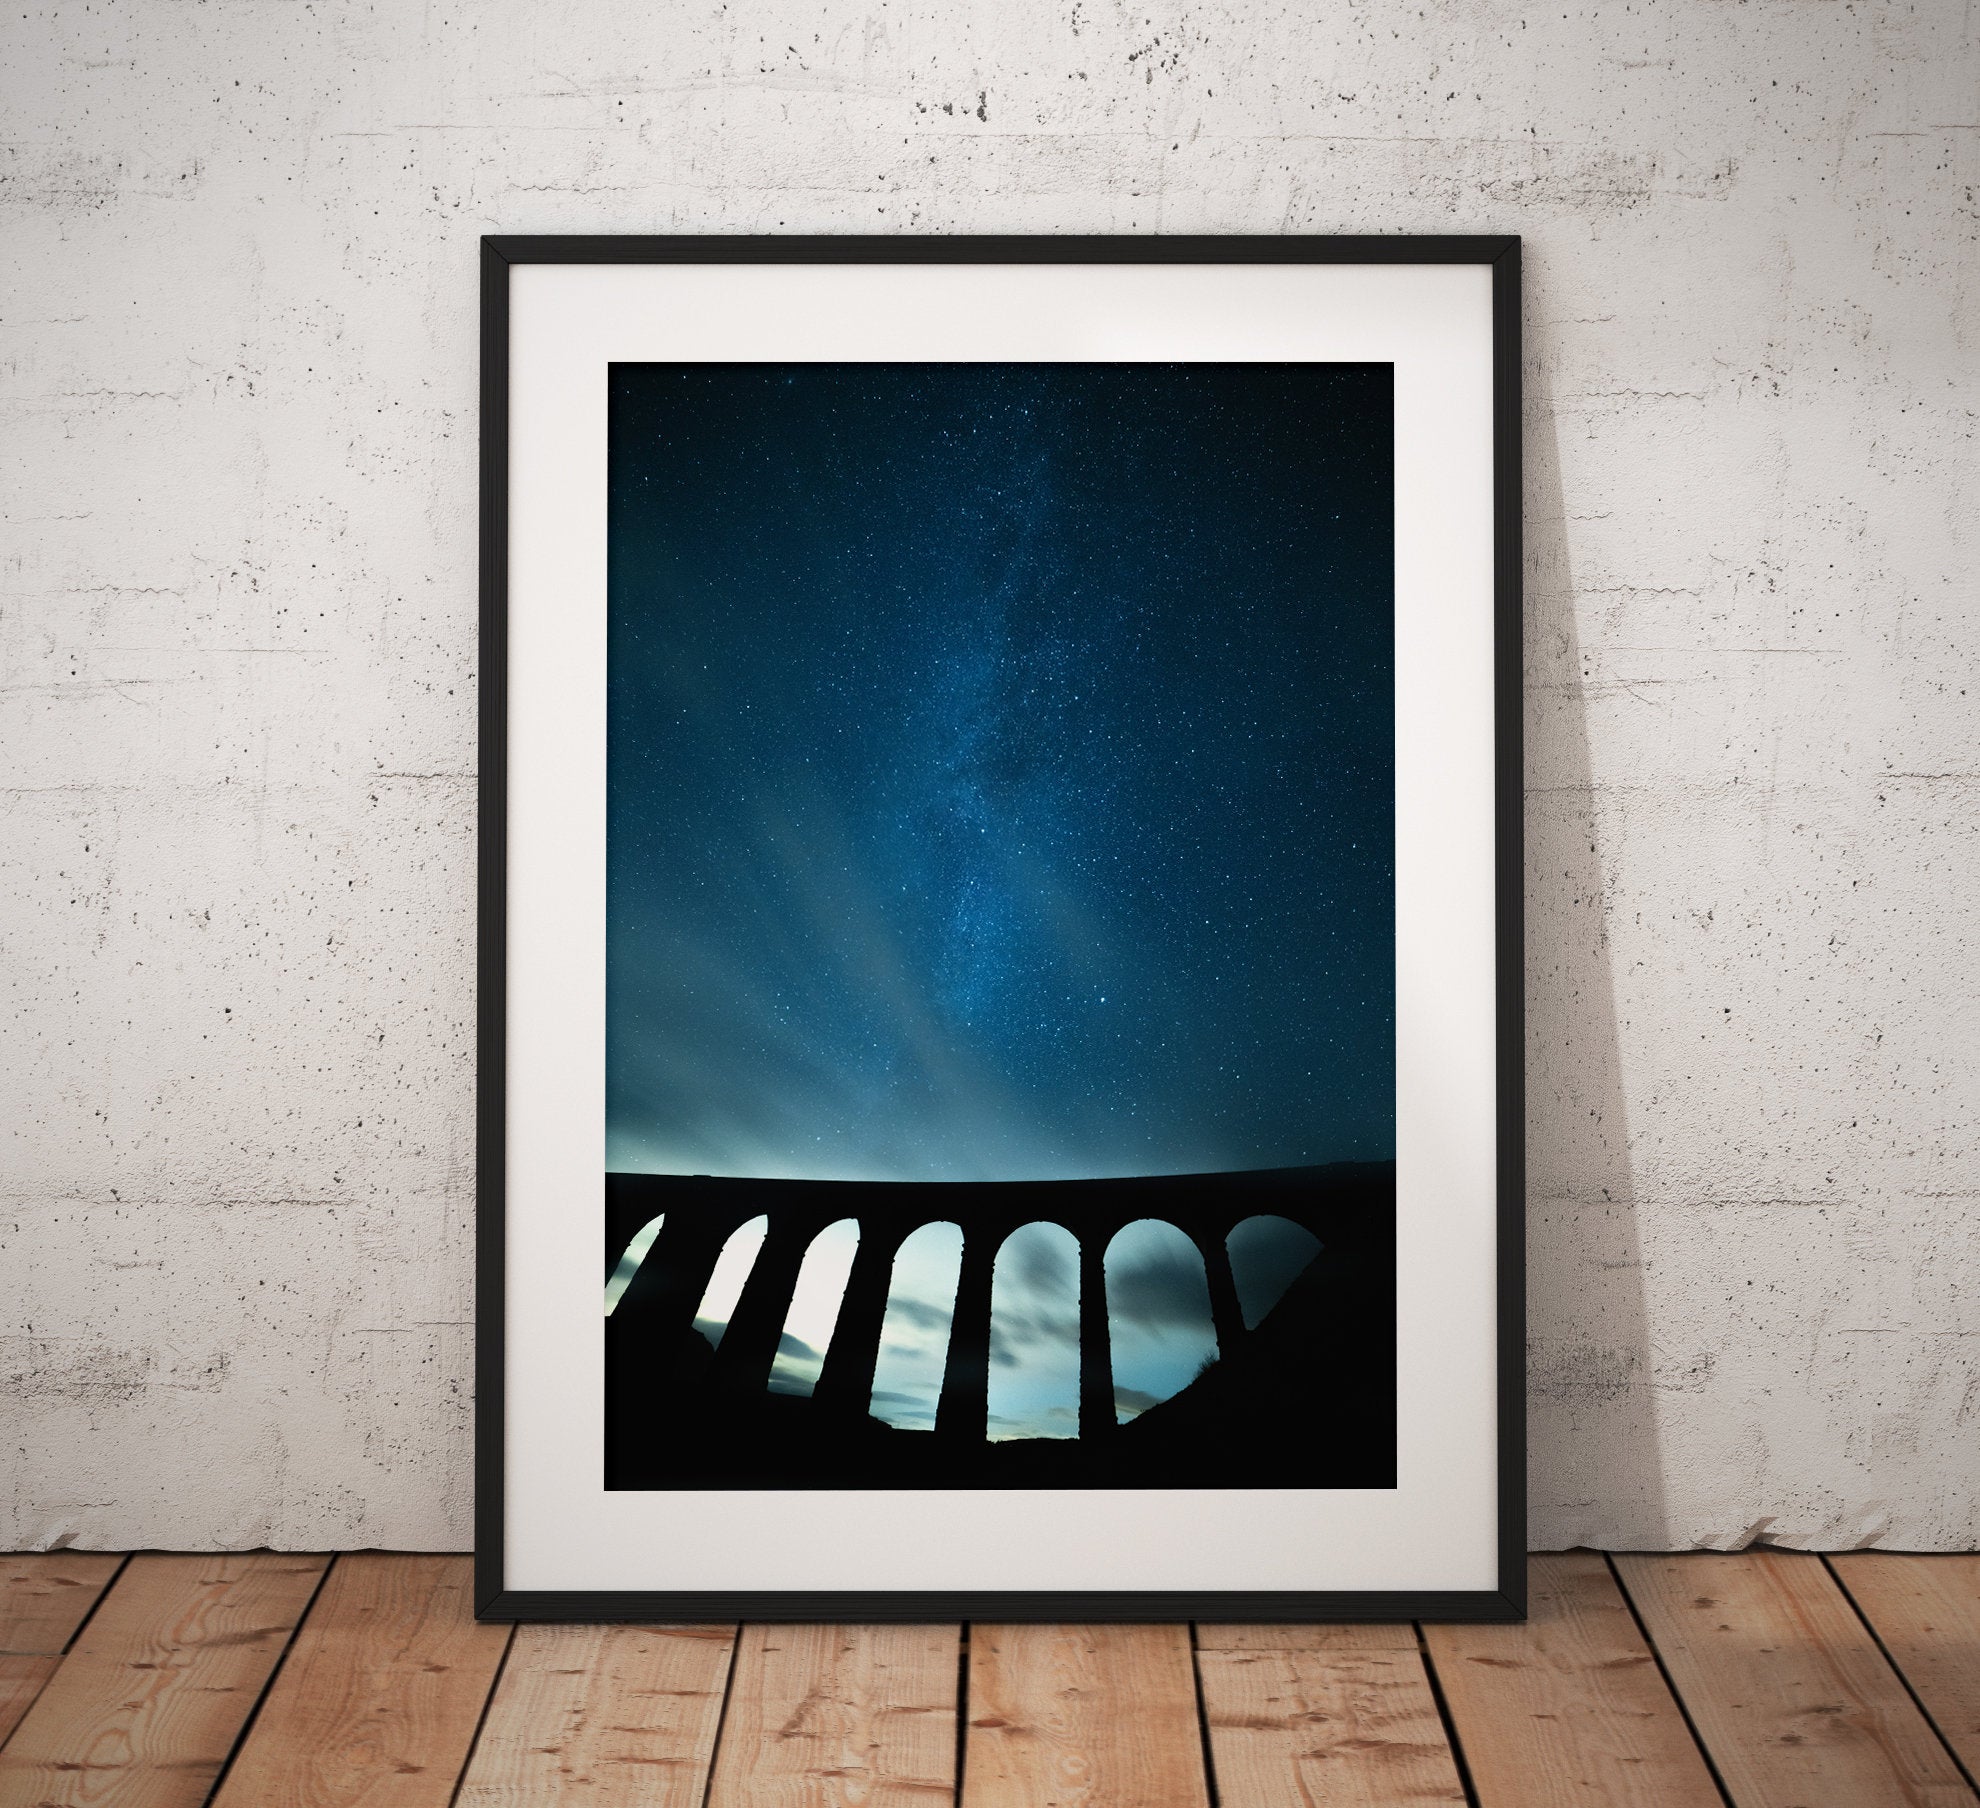 Astro photograph of the Milky way over the dramatic Ribblehead Viaduct in the Yorkshire Dales. England, Star photo, Fine Art, Home Decor